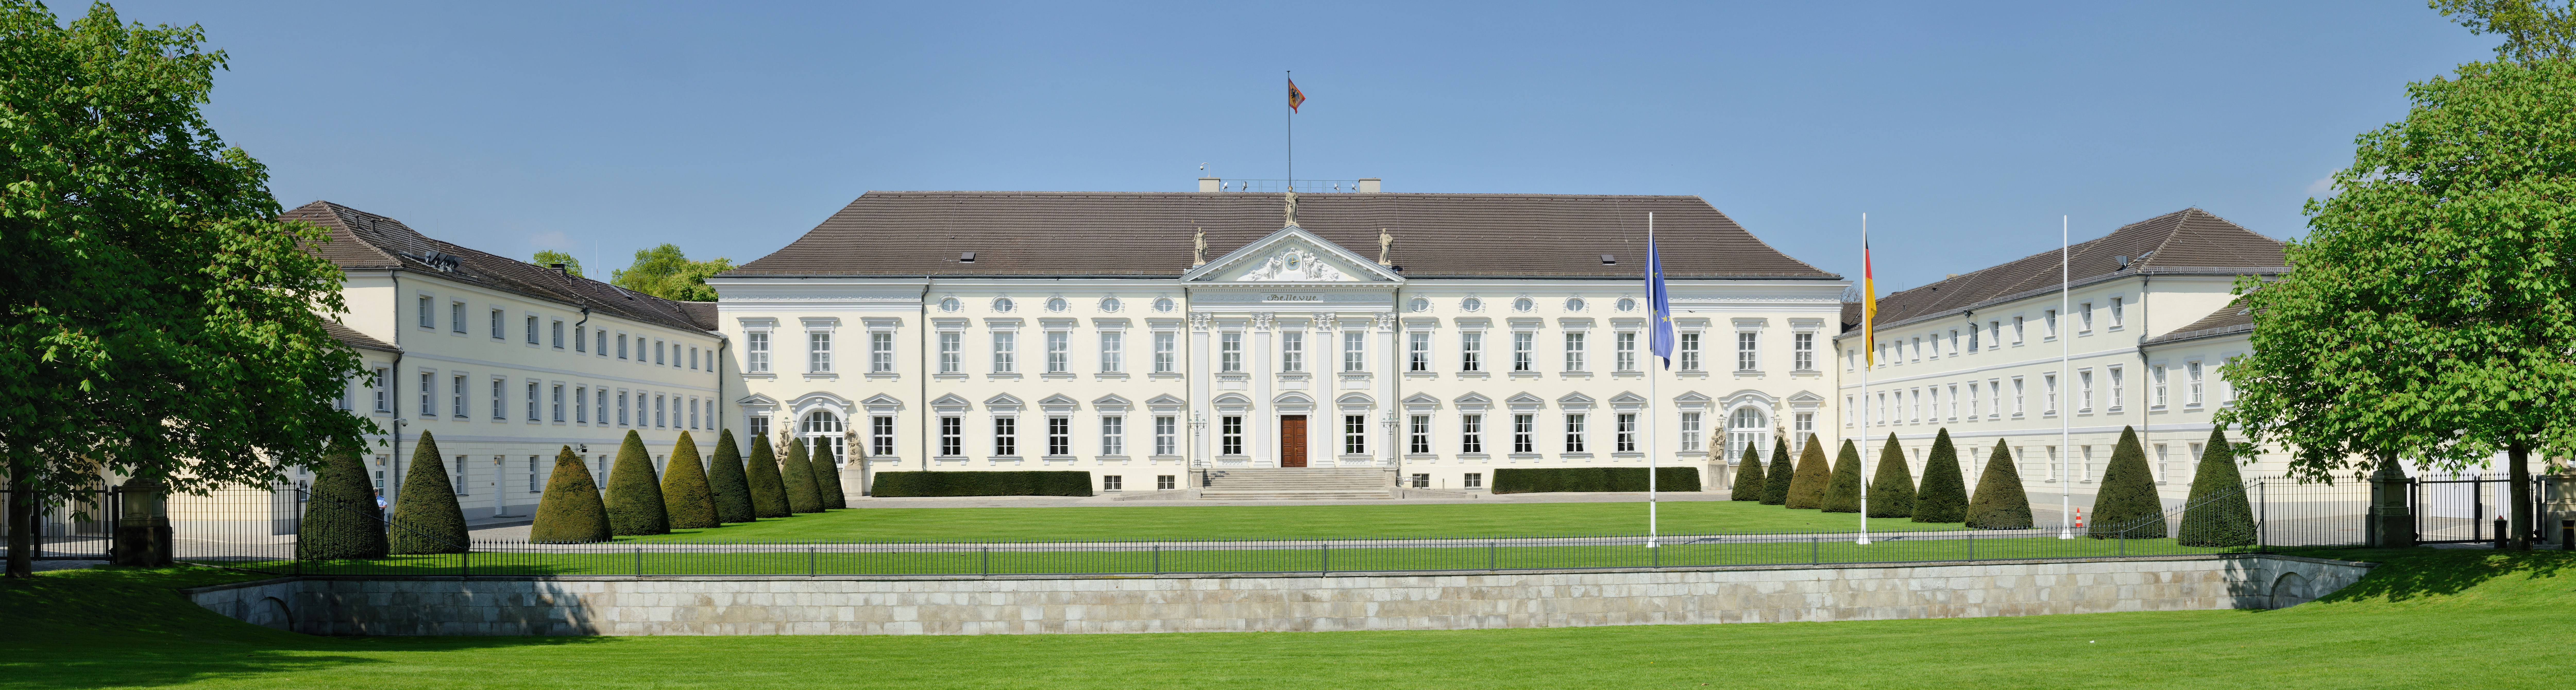 Nice Images Collection: Bellevue Palace (Germany) Desktop Wallpapers